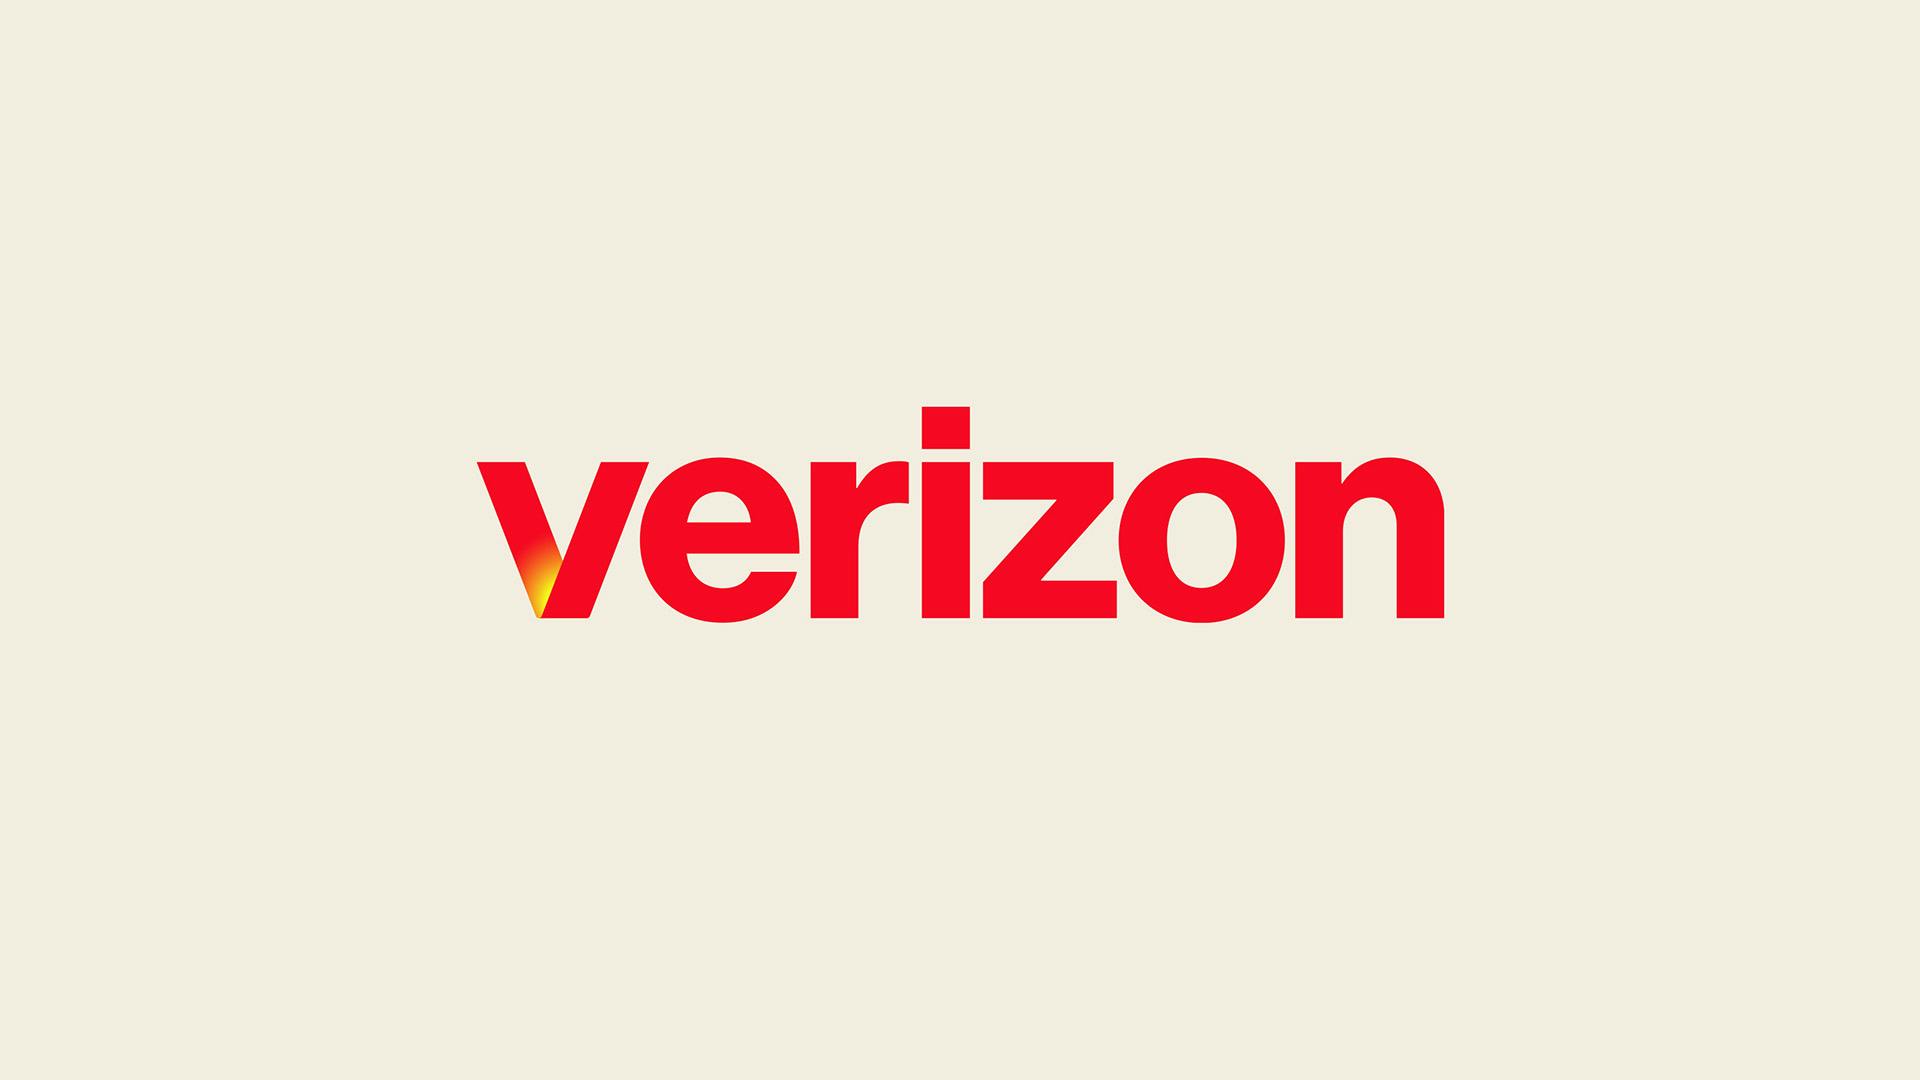 New Verizon wordmark, laid out in a red lowercase letters and a glowing 'V'